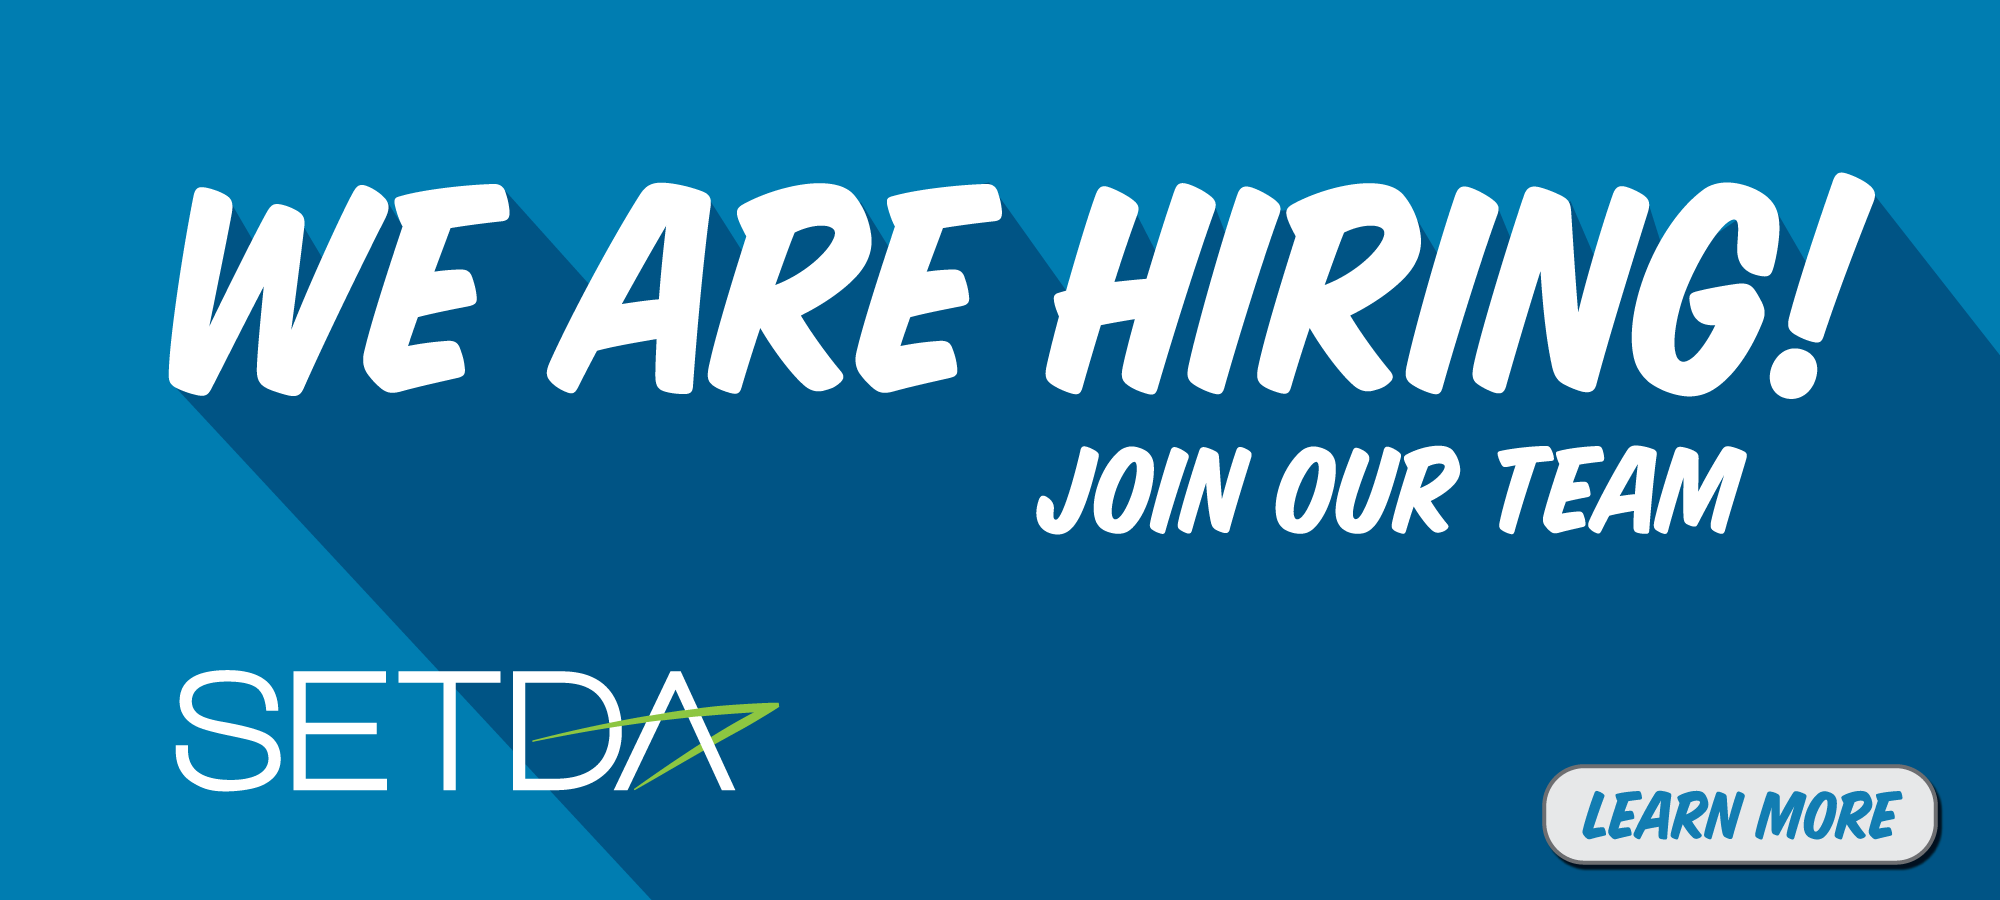 We Are Hiring - SETDA - Learn More